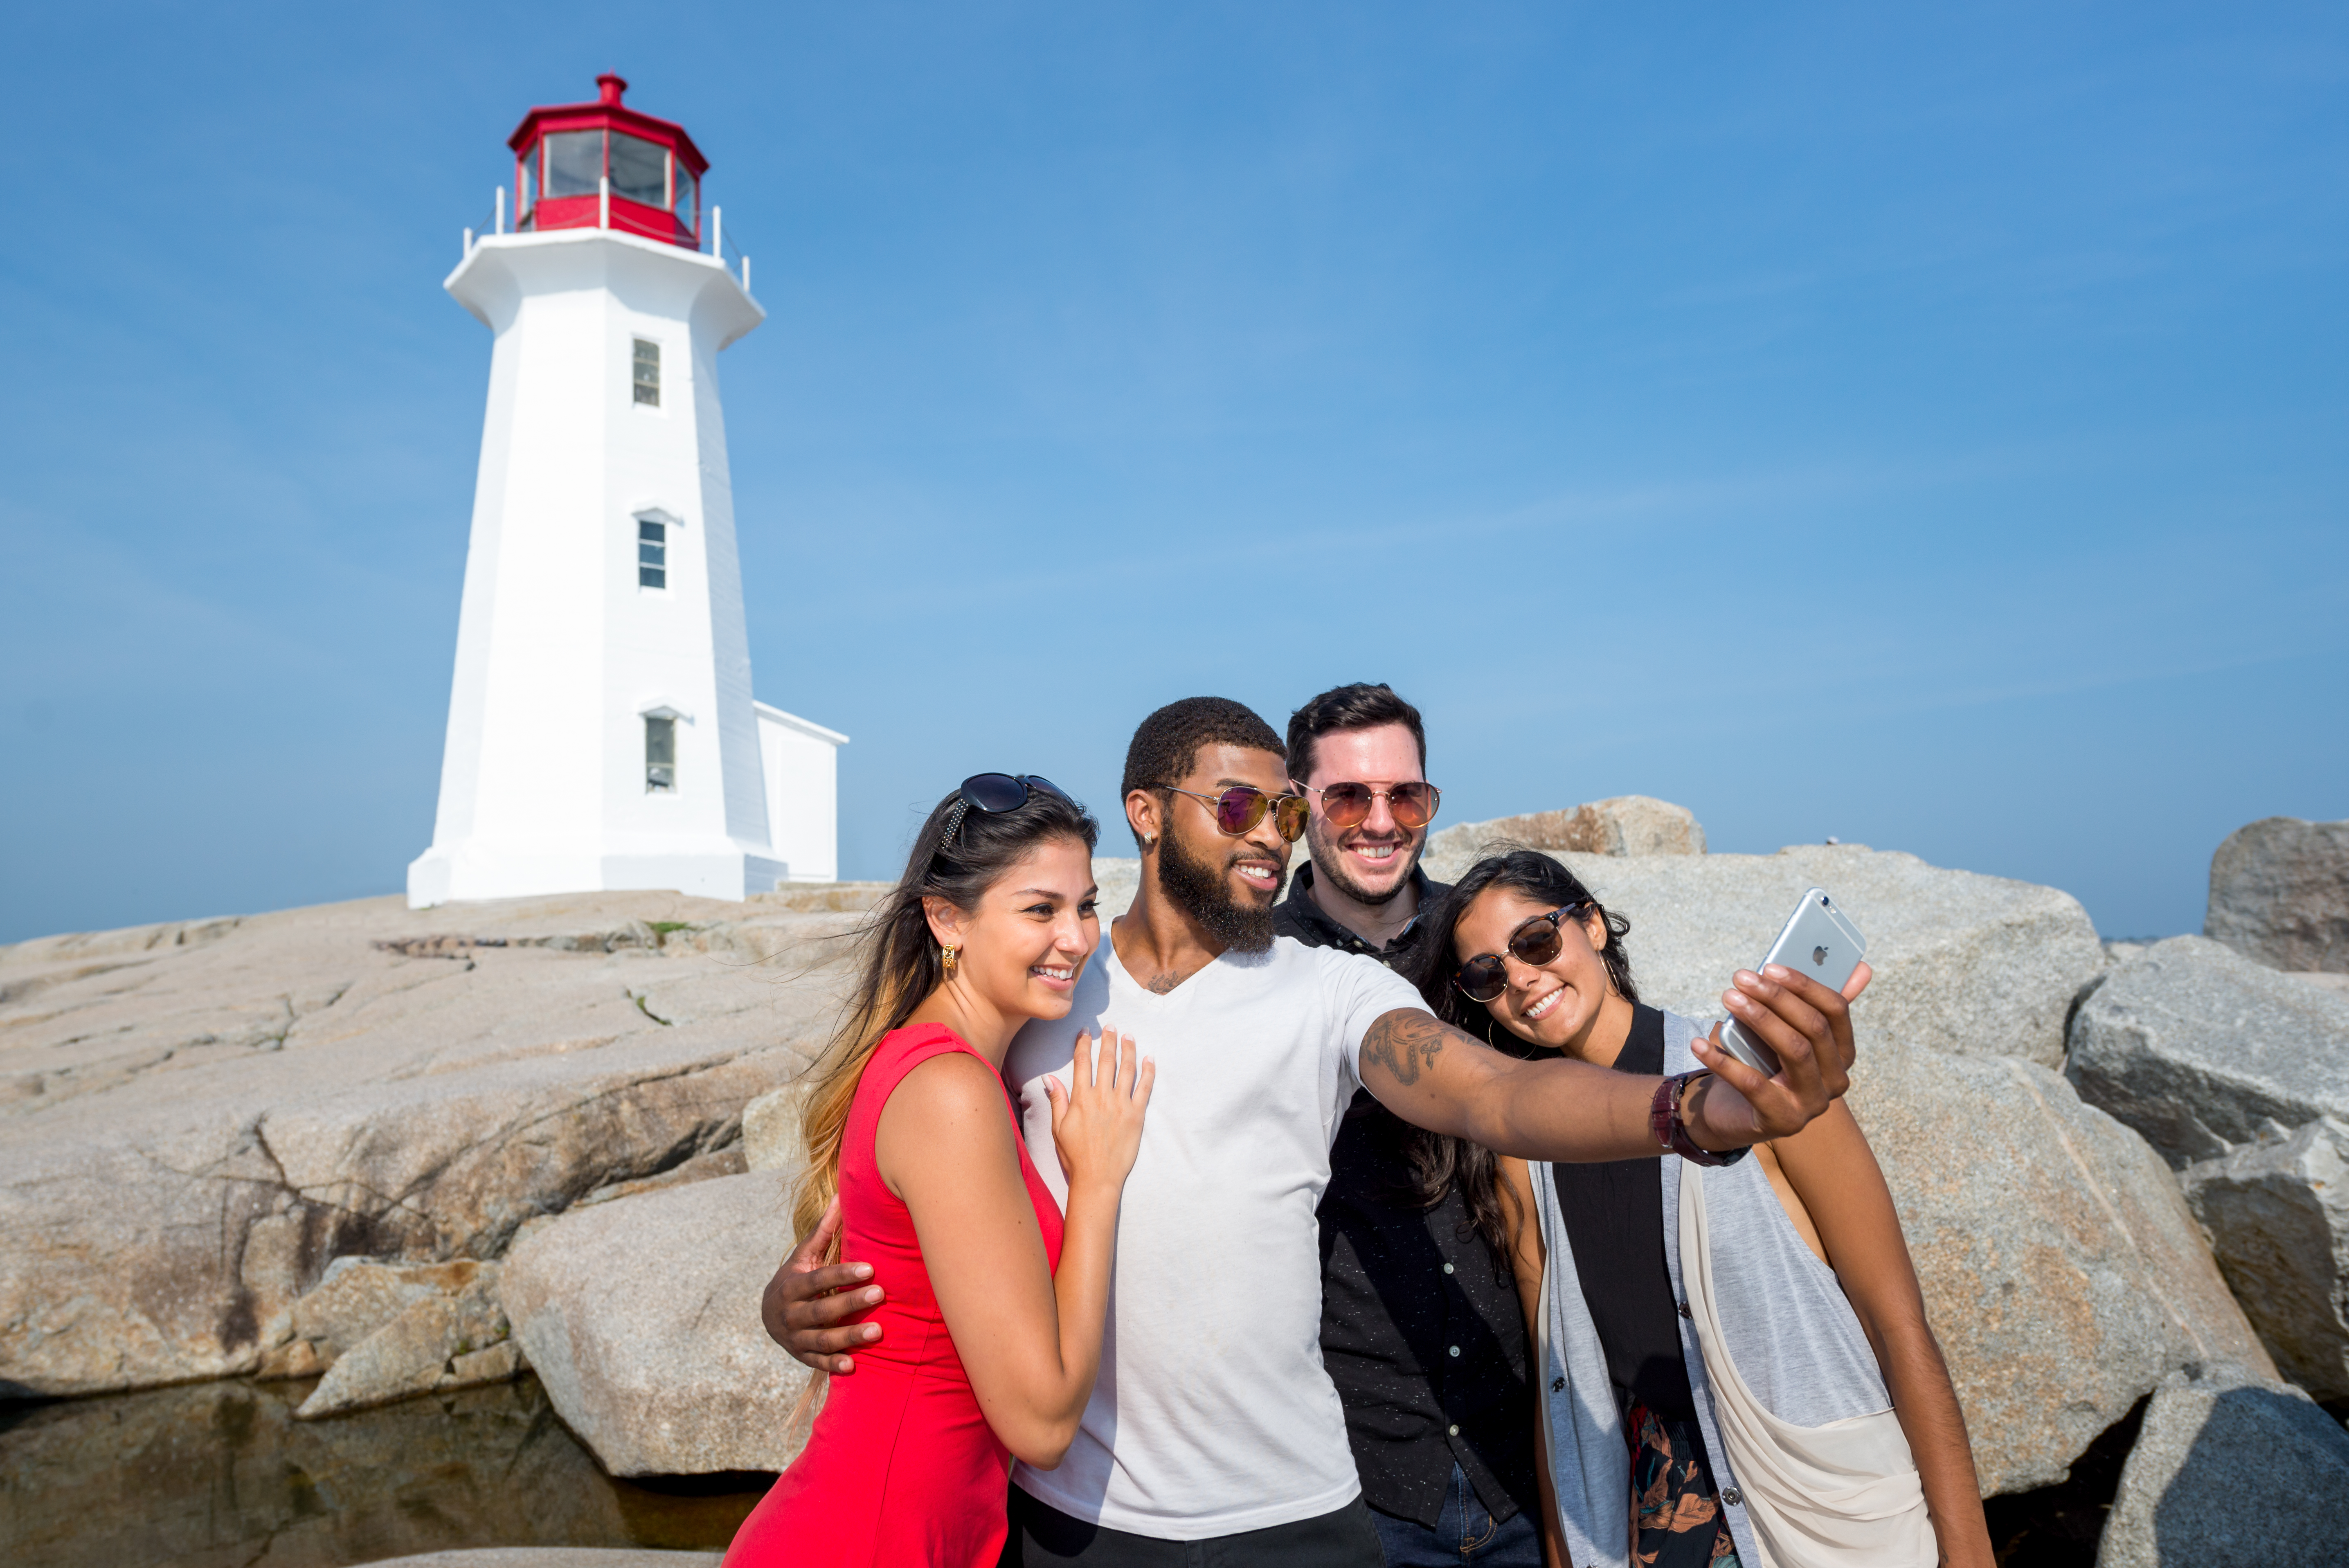 Iconic Lighthouses and Majestic Seascapes (Sightseeing Peggy’s Cove)